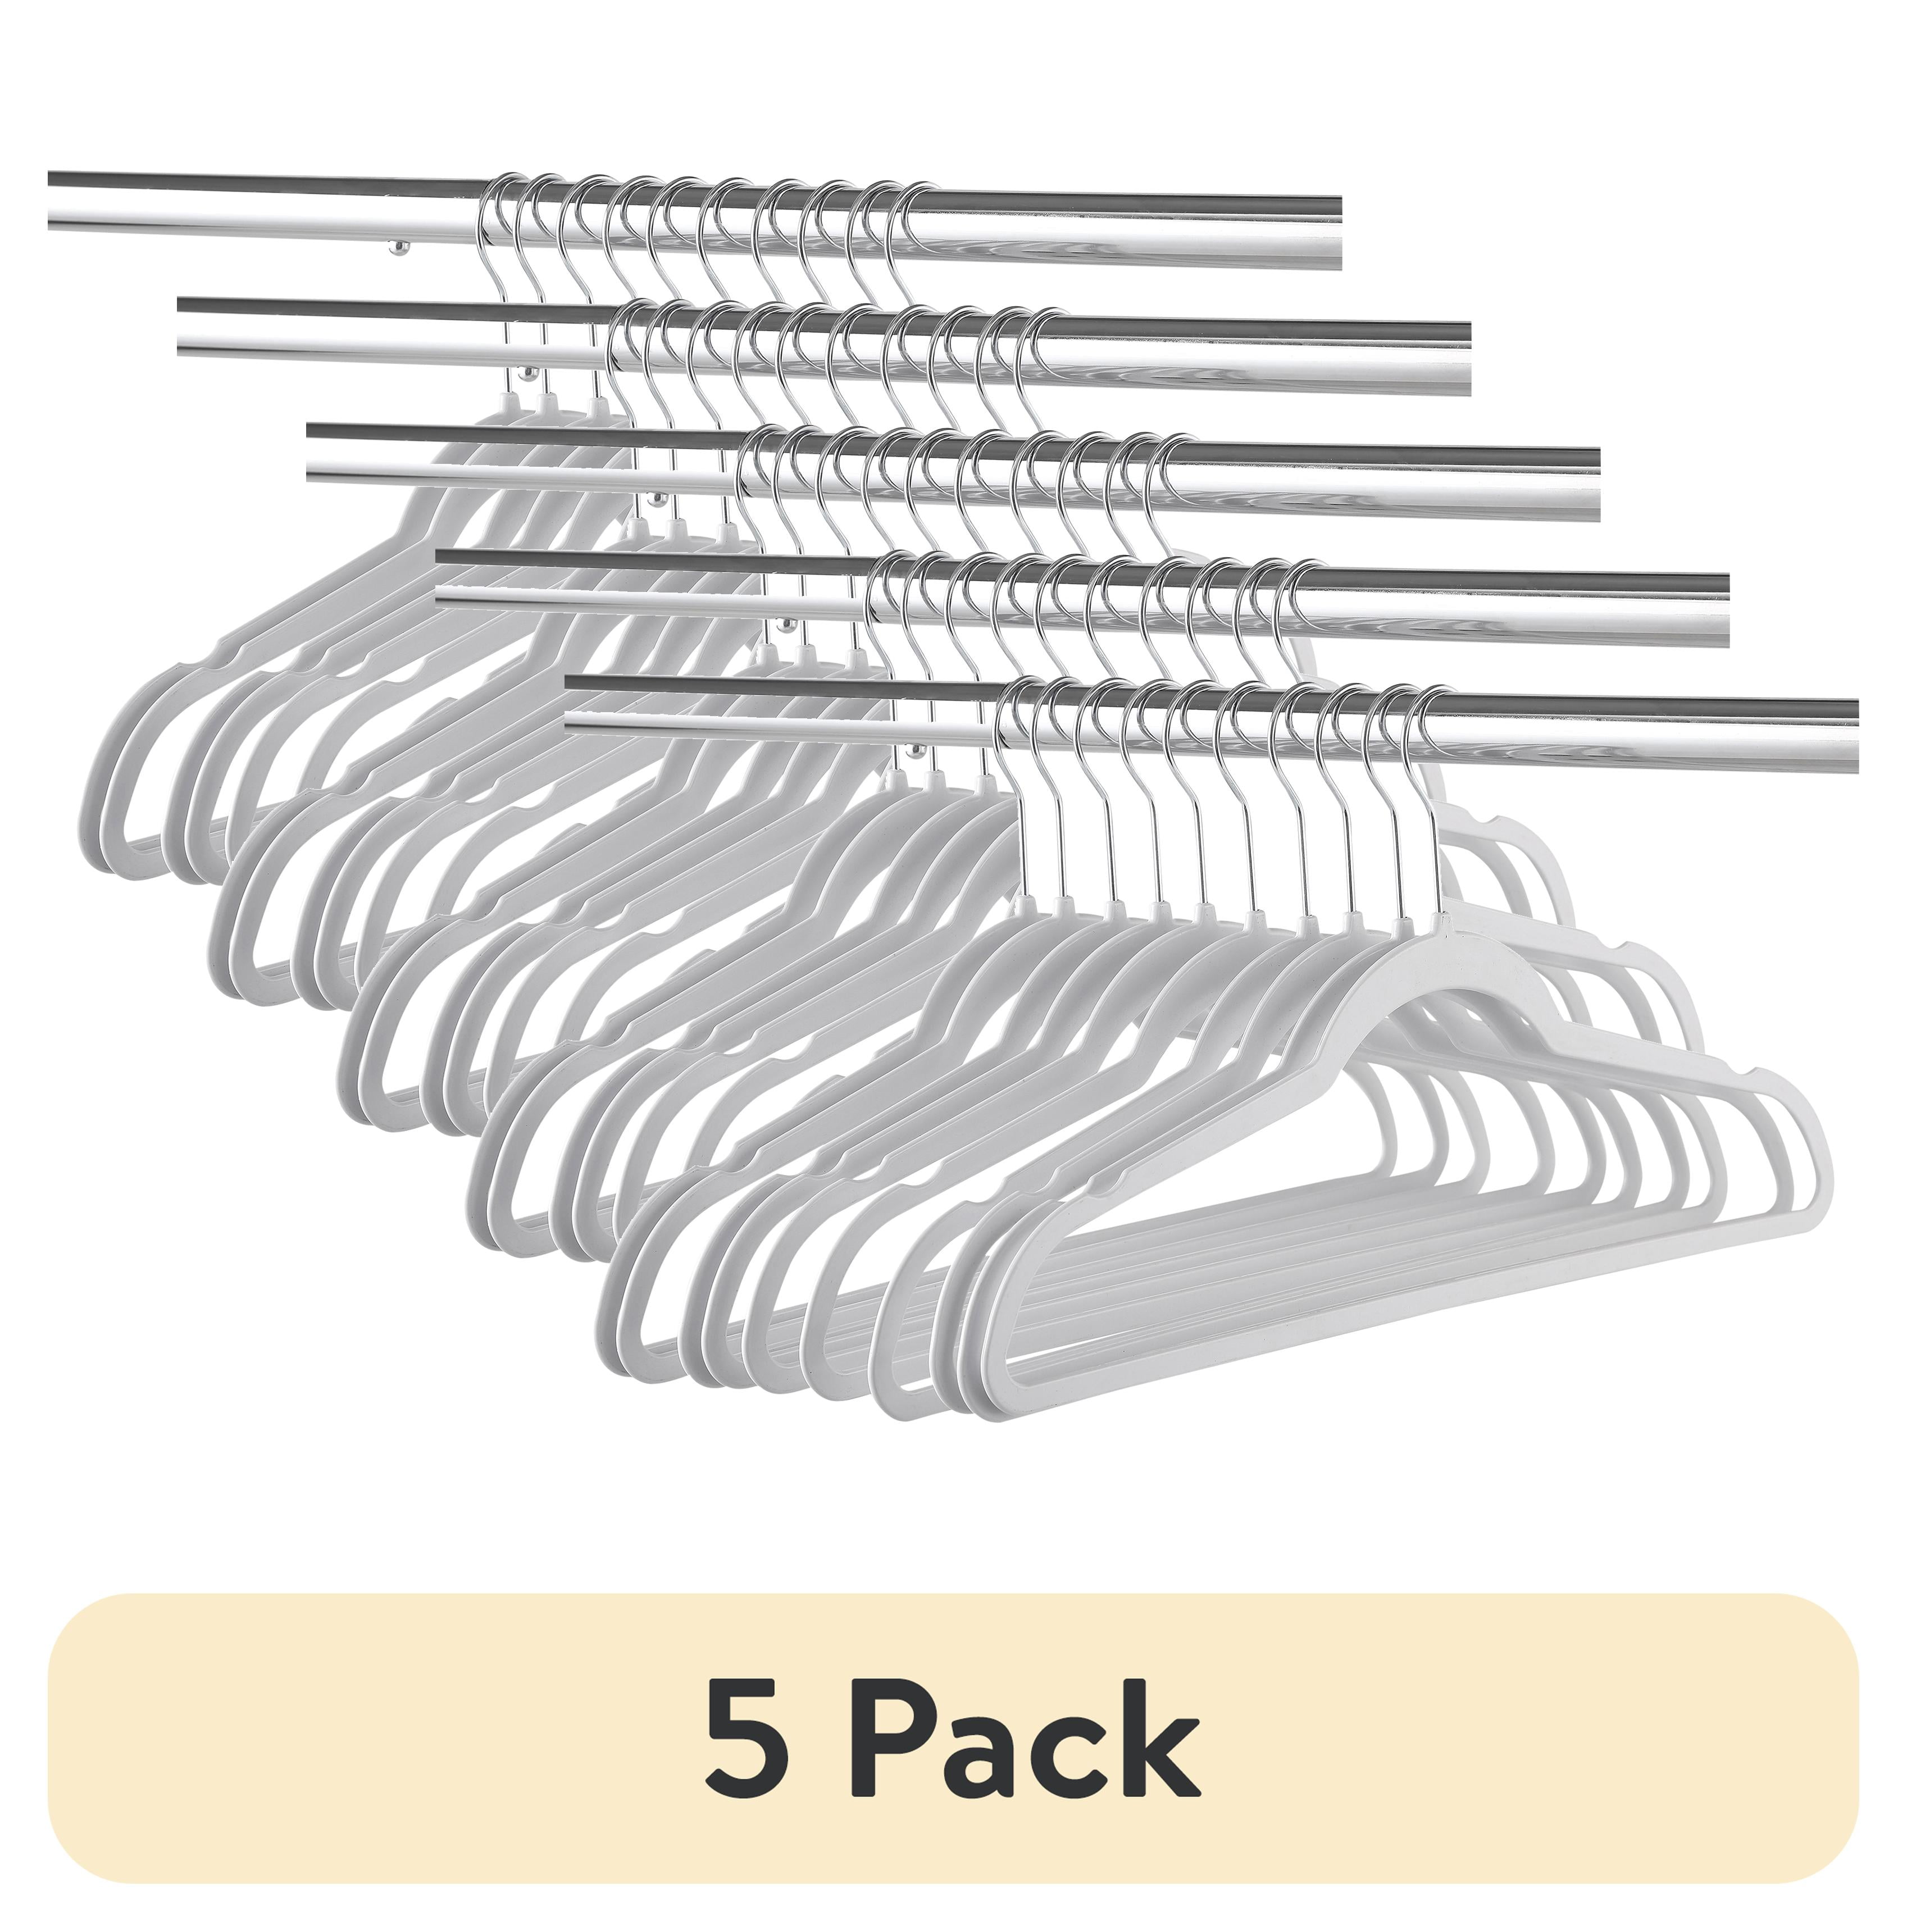 Set of 10 Slim Clothes Hanger by Neatfreak! - Space Saving Hangers For  Clothes, Pants, Lingerie and Accessories - Robust White Plastic Hangers  With